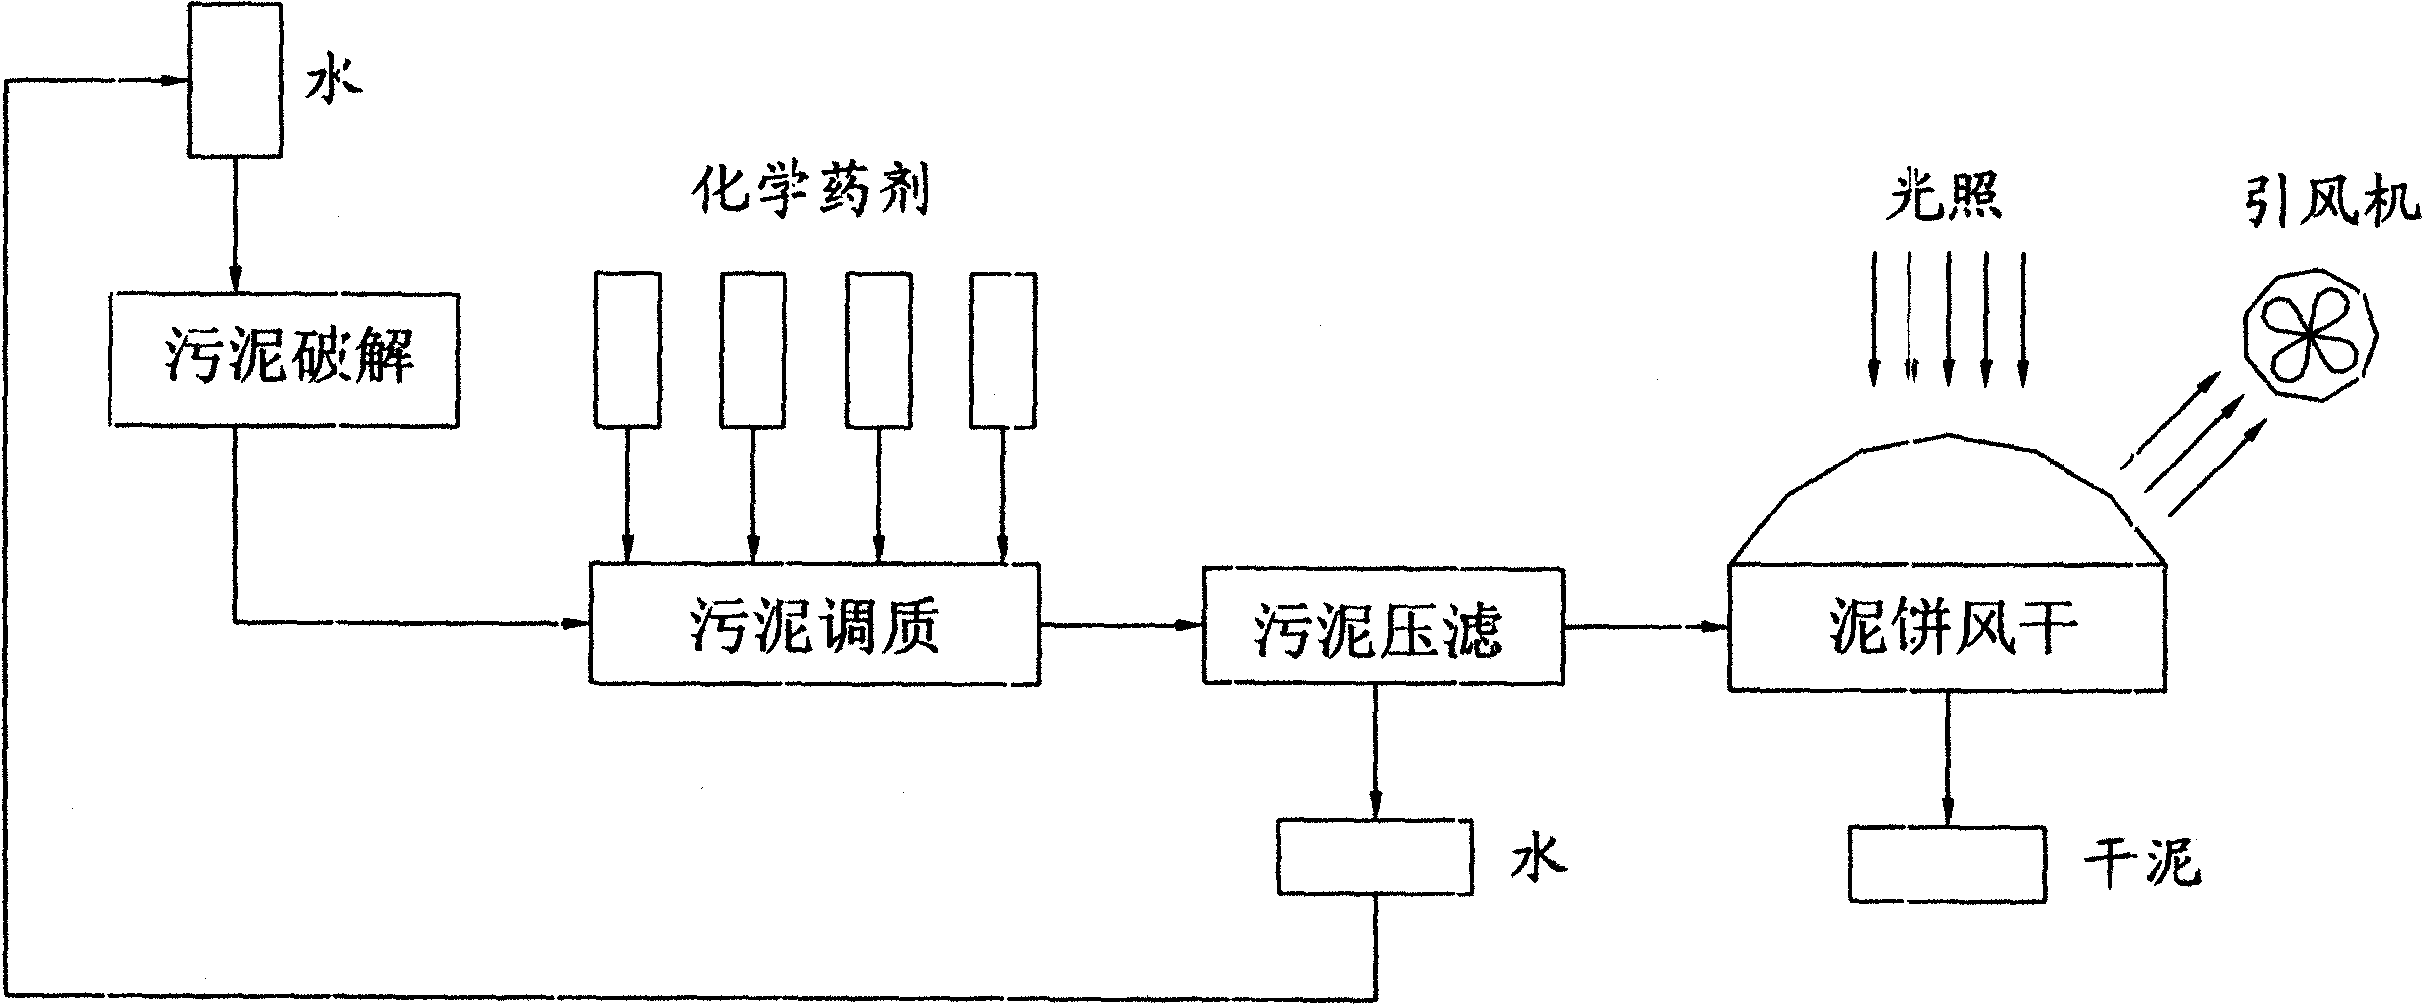 Low-energy drying treatment method for discharged sludge